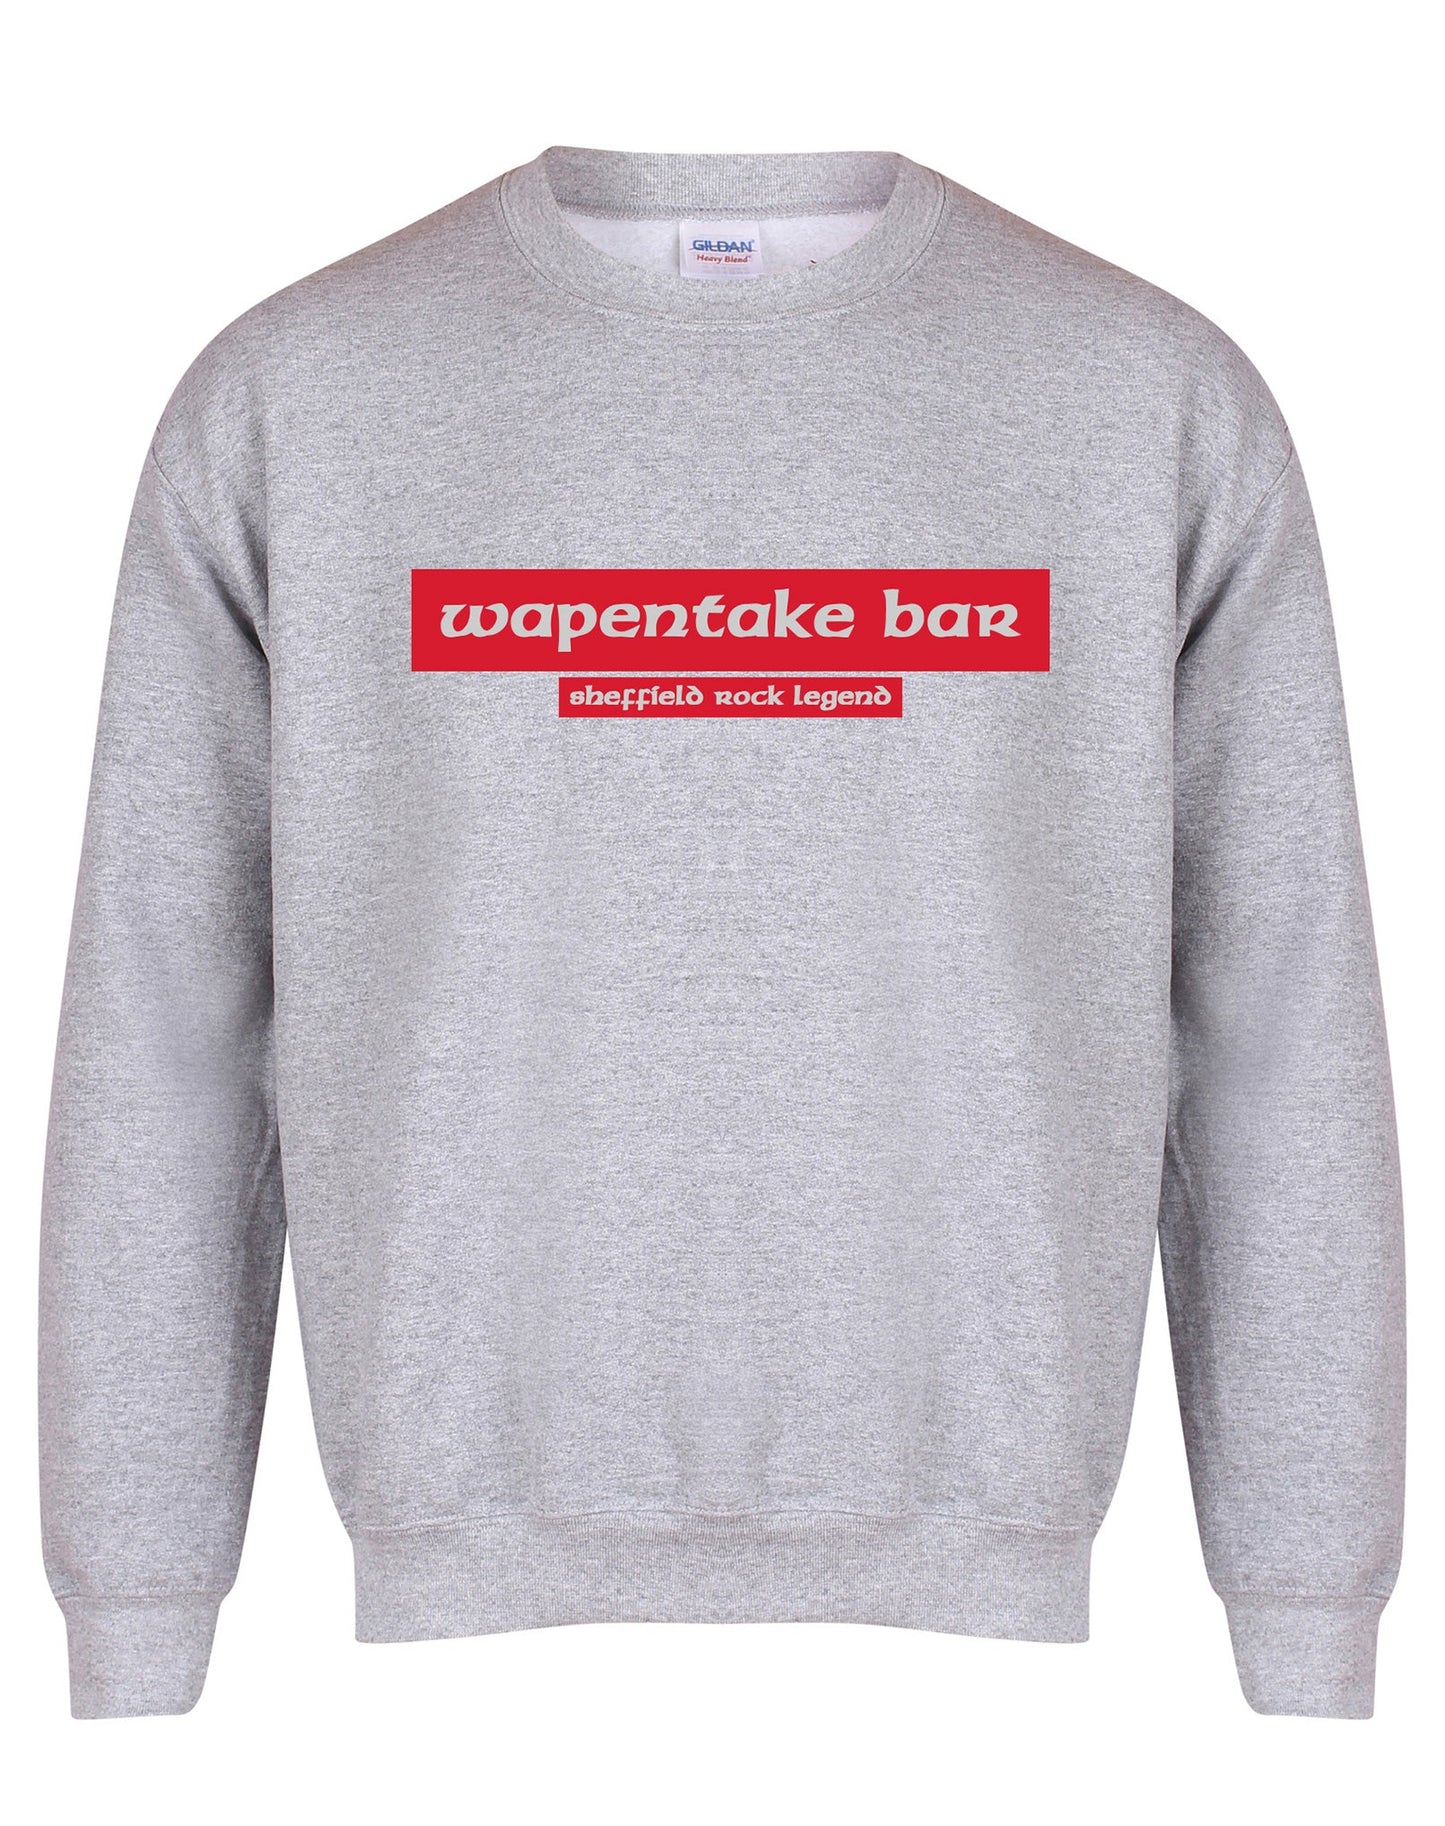 Wapentake original sign unisex fit sweatshirt - various colours - Dirty Stop Outs